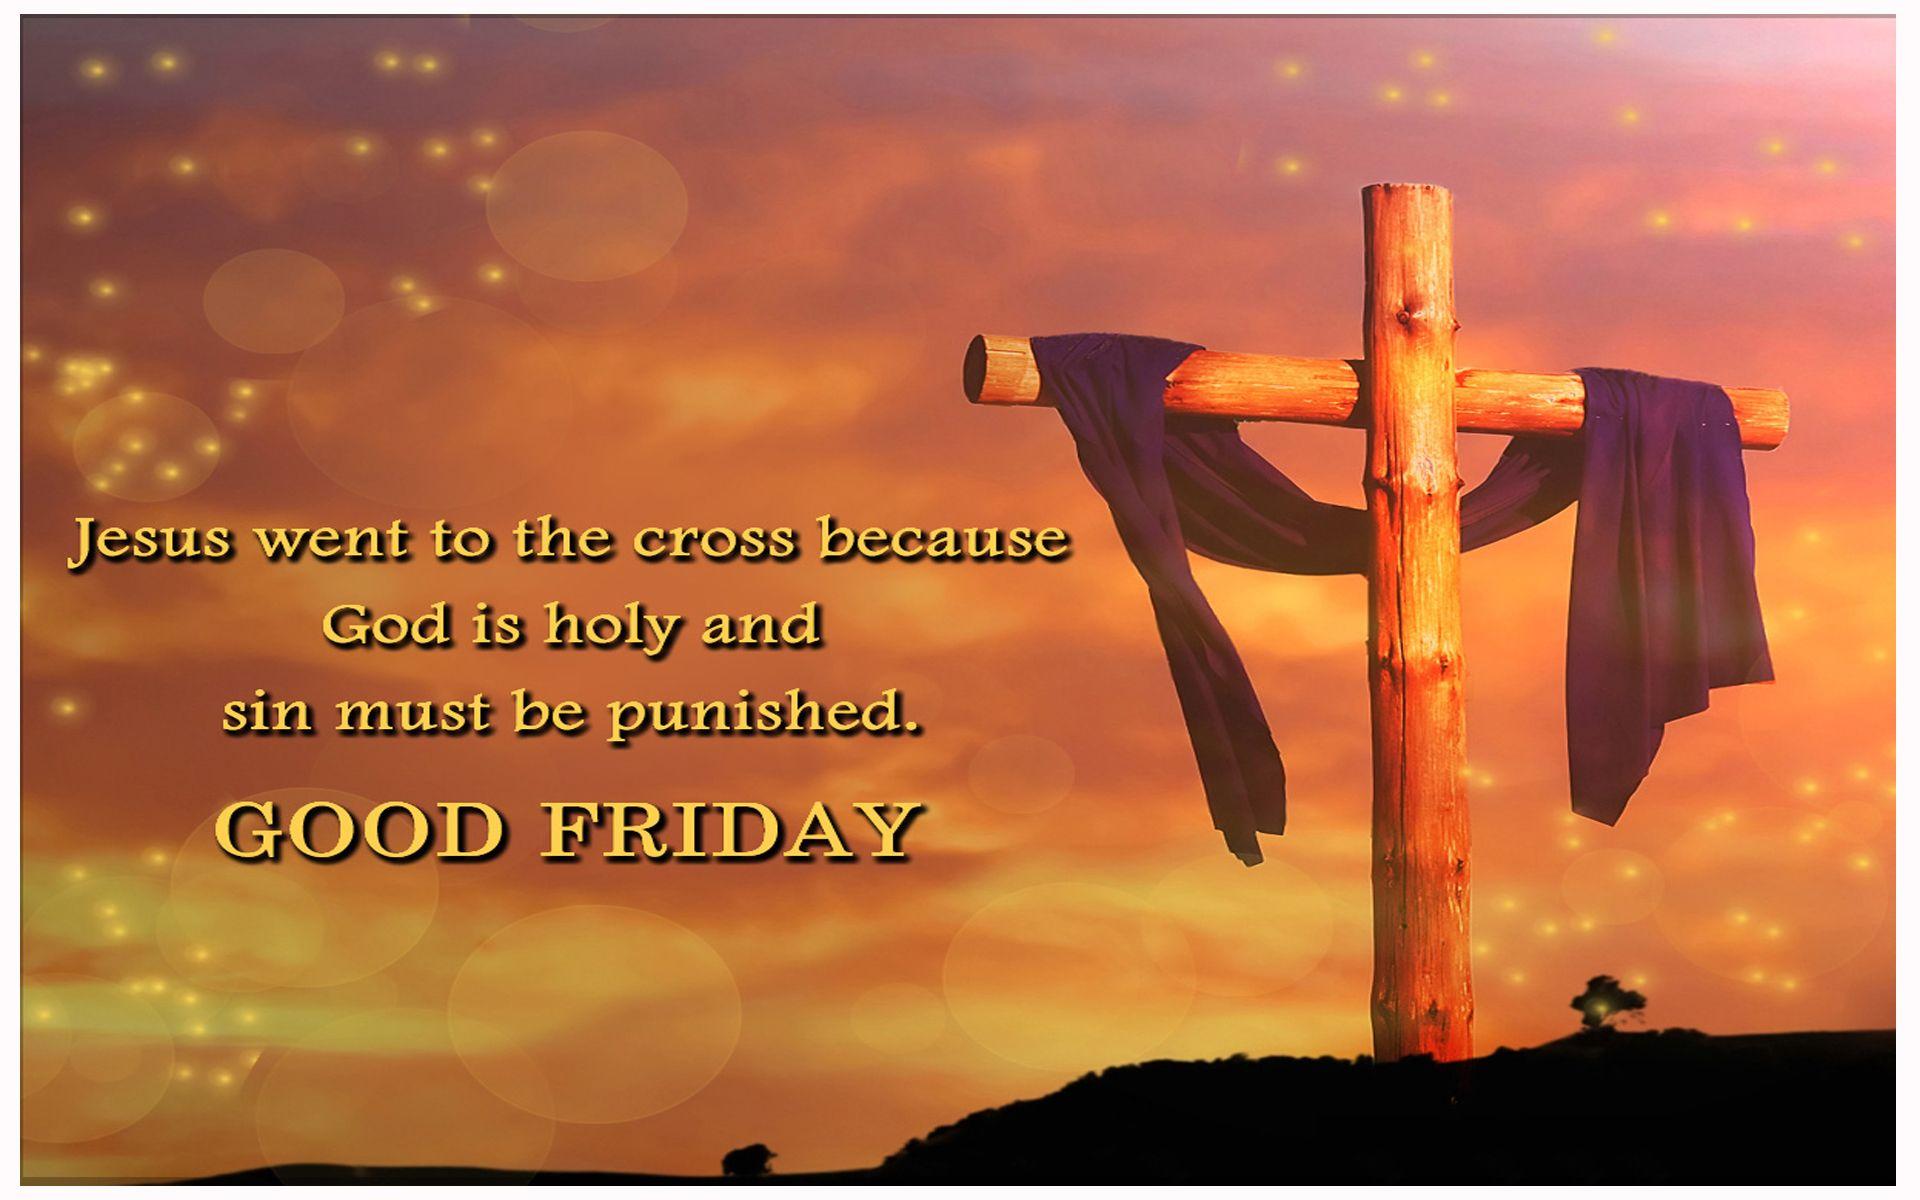 Good Friday wallpapers of Jesus